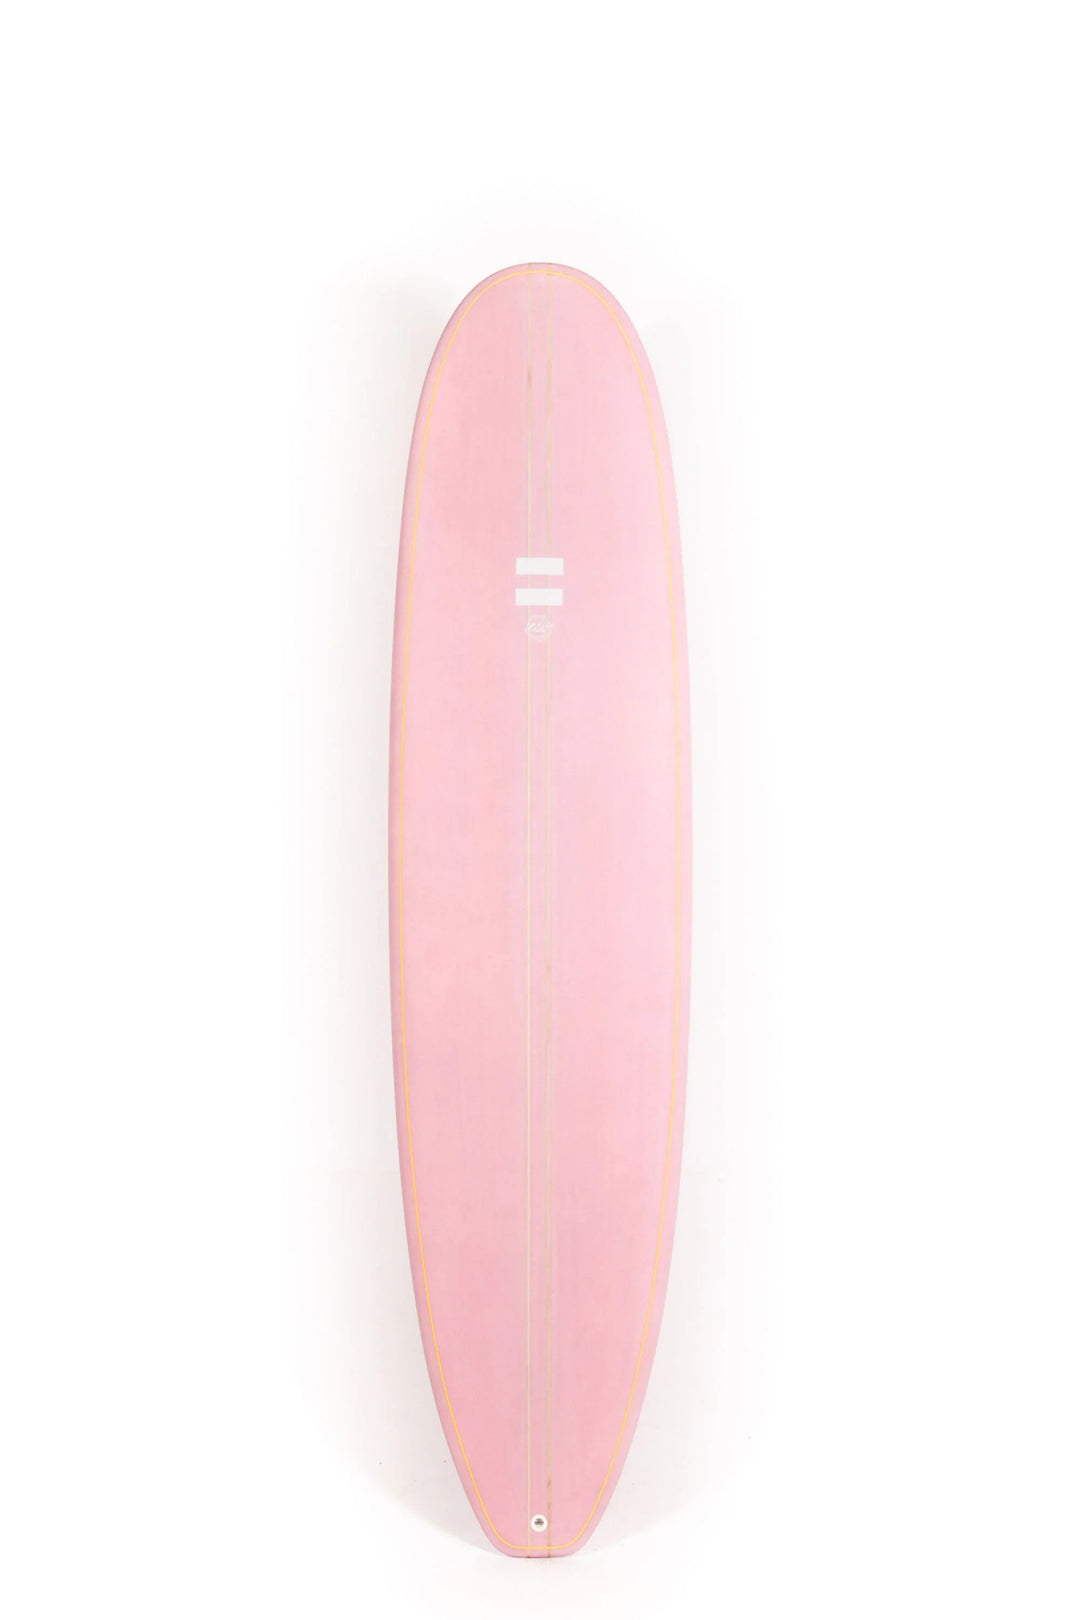 Indio Surfboards Mid Length 7'6" - Pink